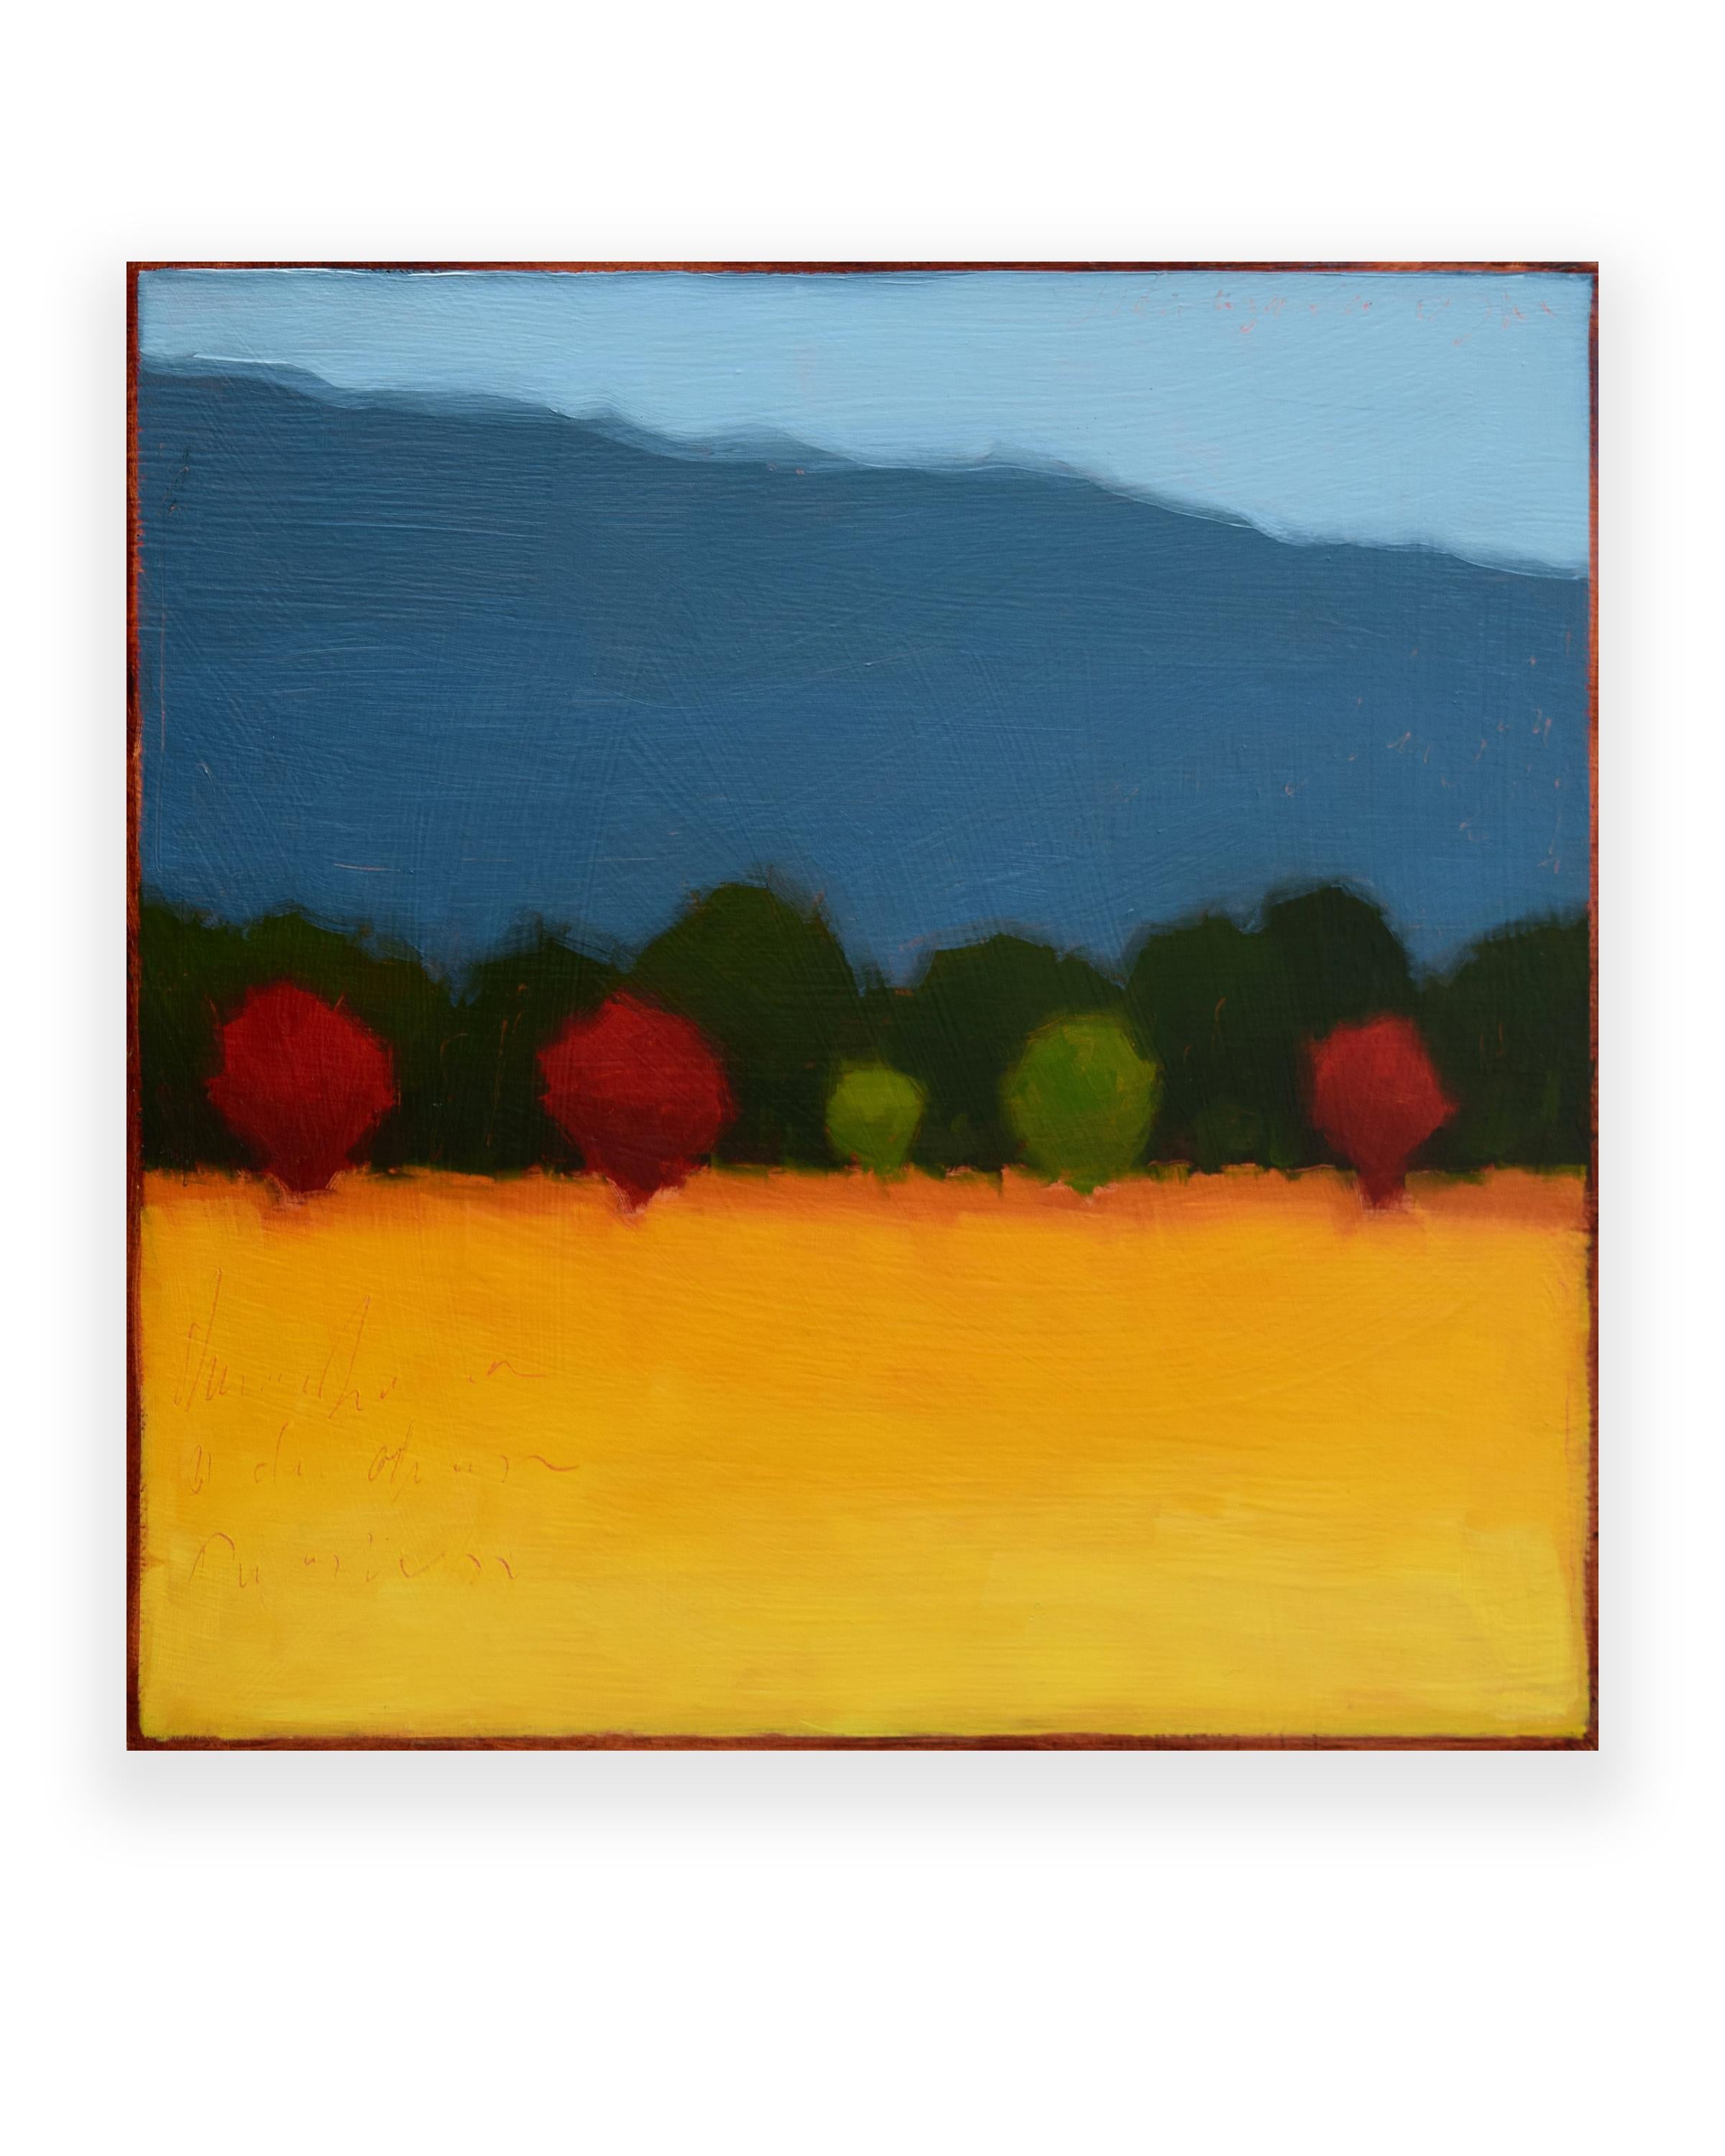 Bright Field (Color Field Painting of a Rural Landscape in Autumn) by Tracy Helgeson
10 x 10 x 2 inches, oil on birch panel

Tracy Helgeson plays on the idea of color field painting with rural landscapes saturated in improbable hues. Helgeson